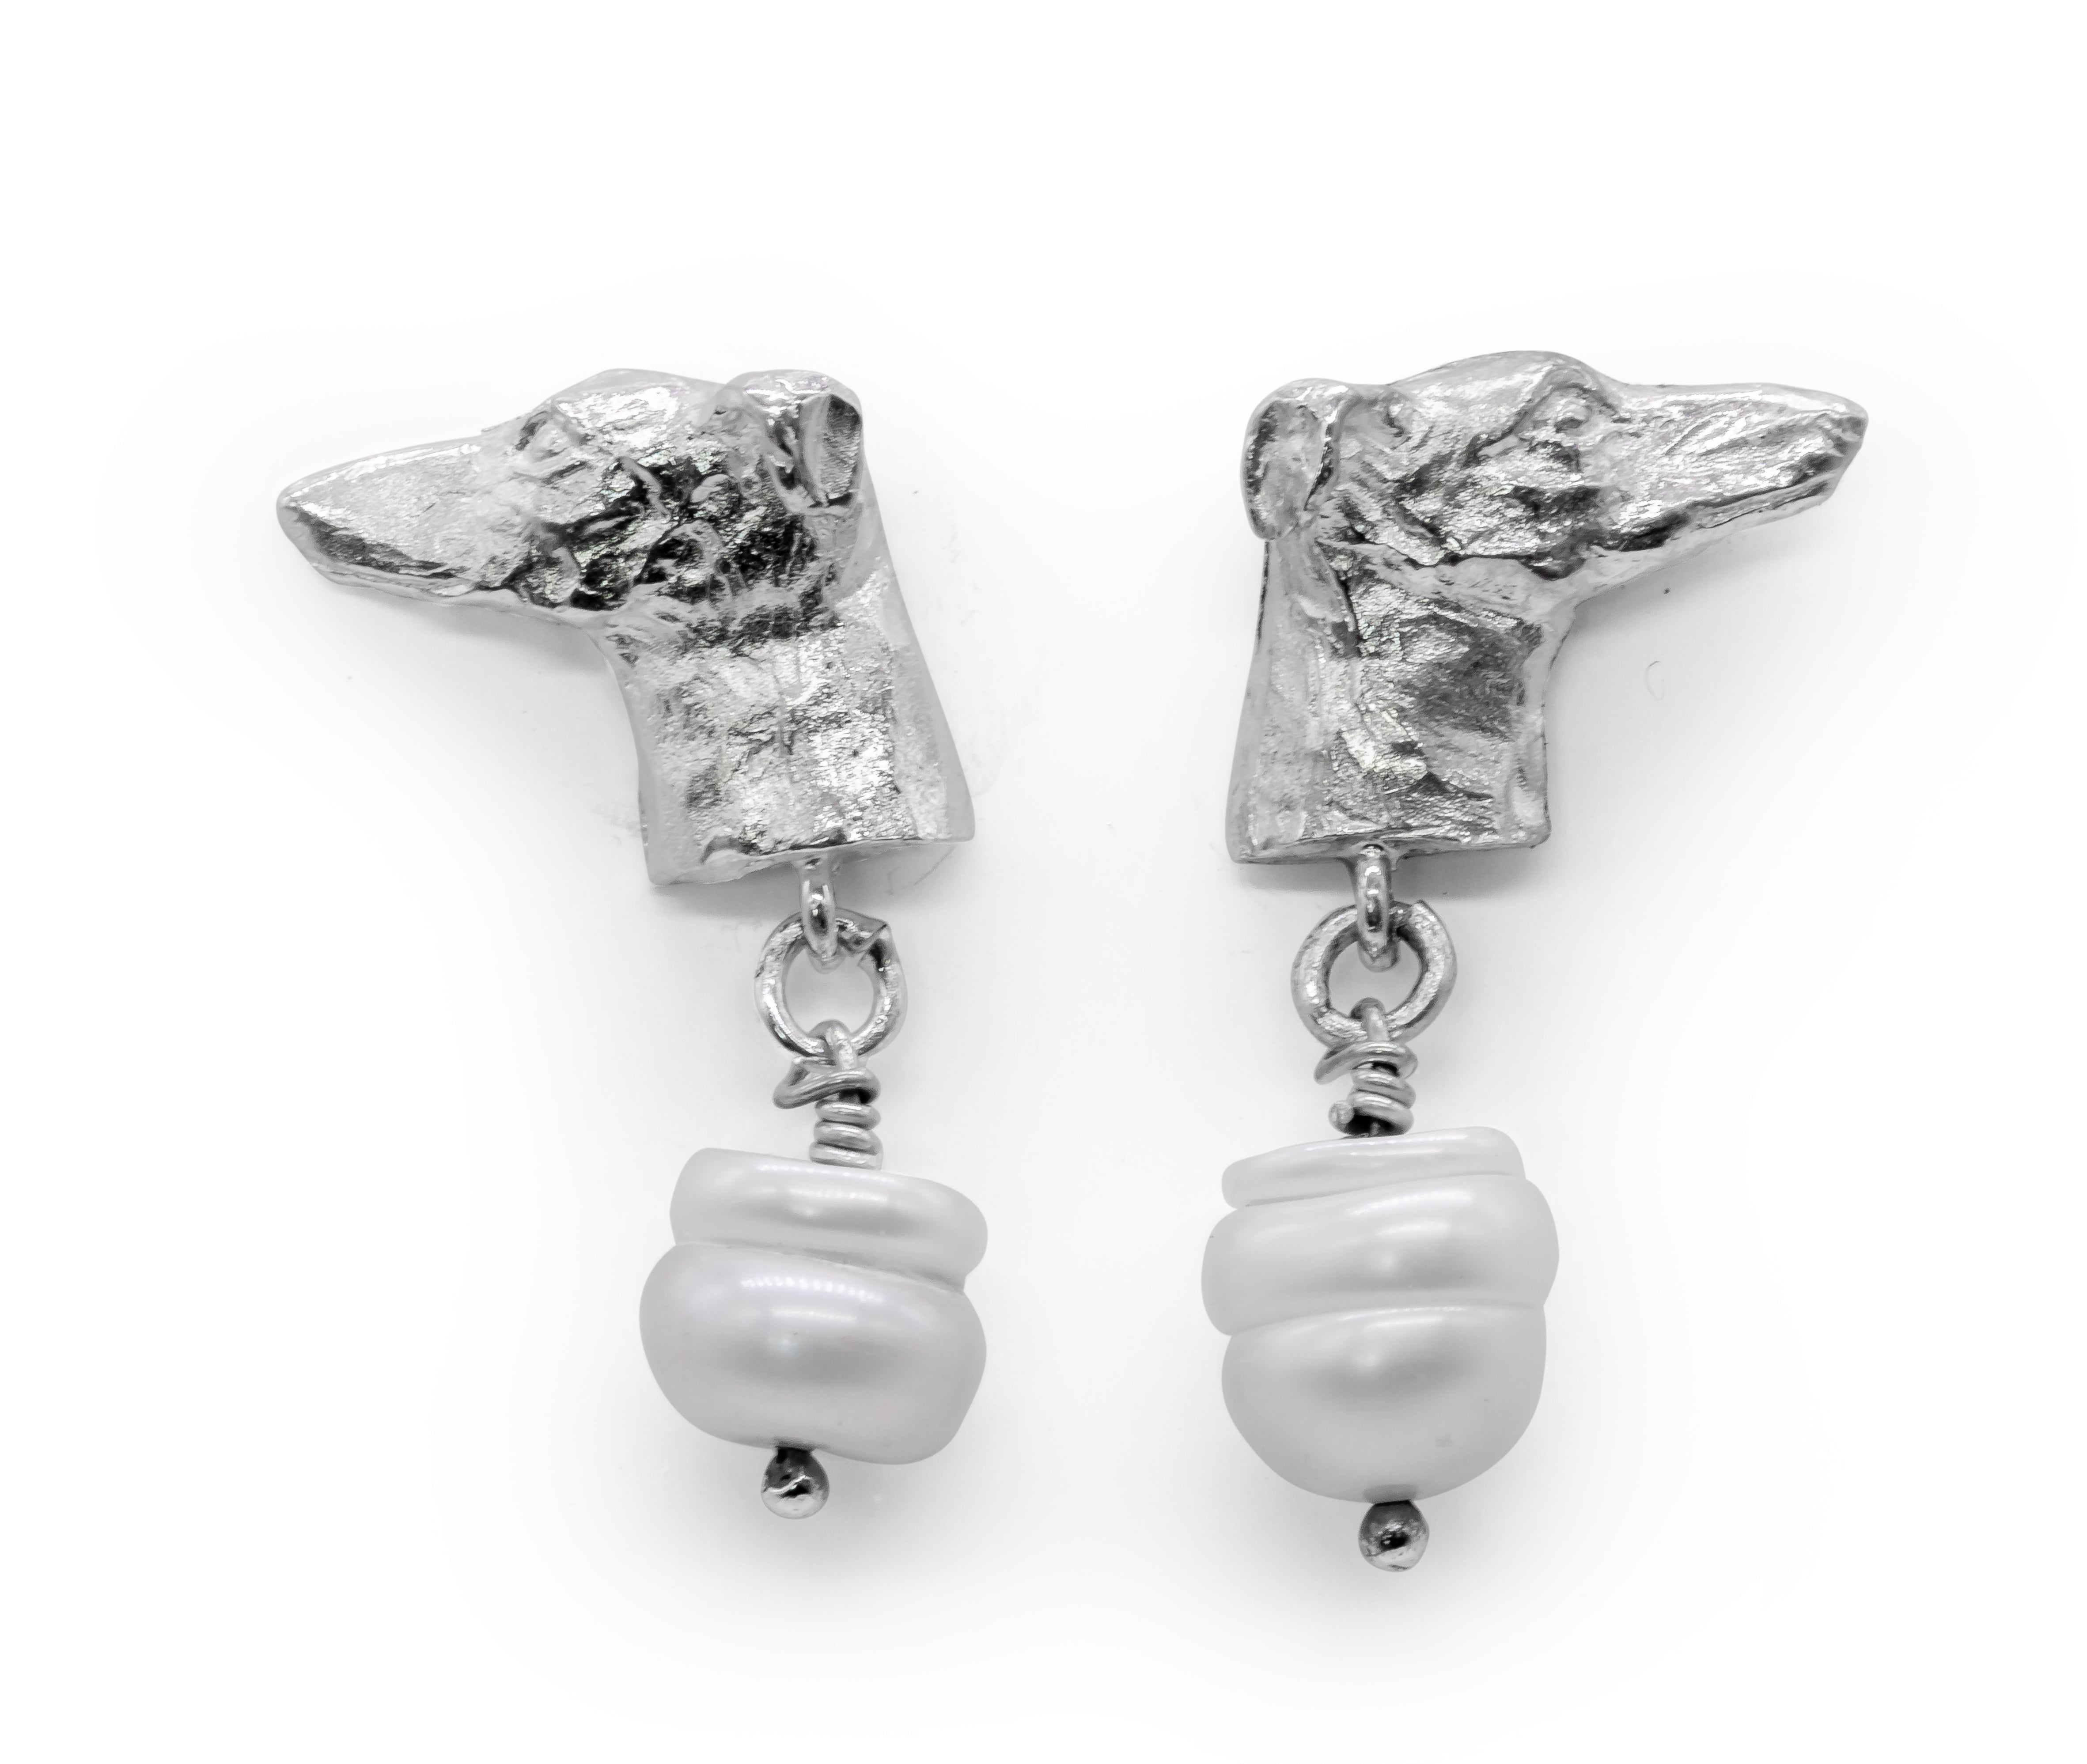 Greyhound stud earrings with freshwater pearl drops